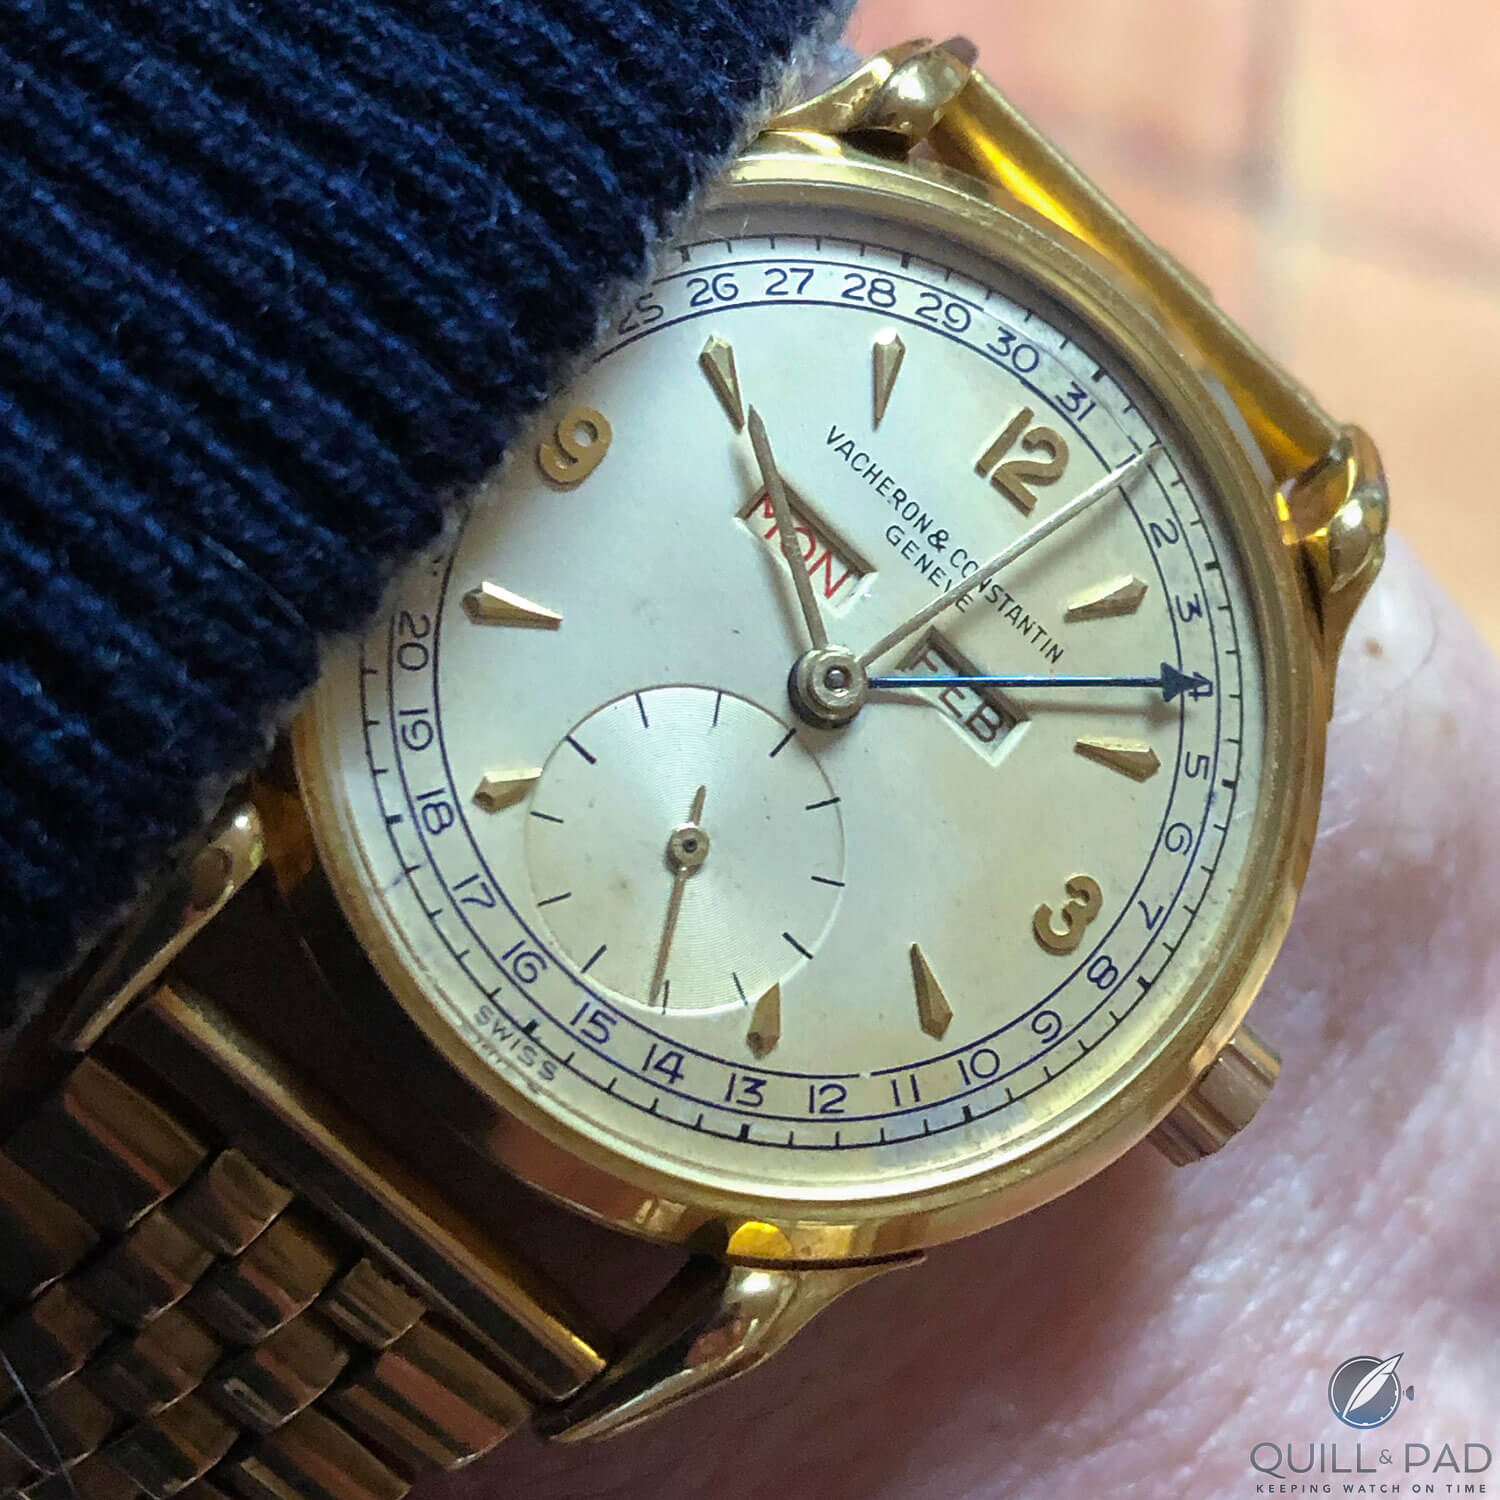 Parting shot: Vacheron & Constantin Reference 4560 on the wrist